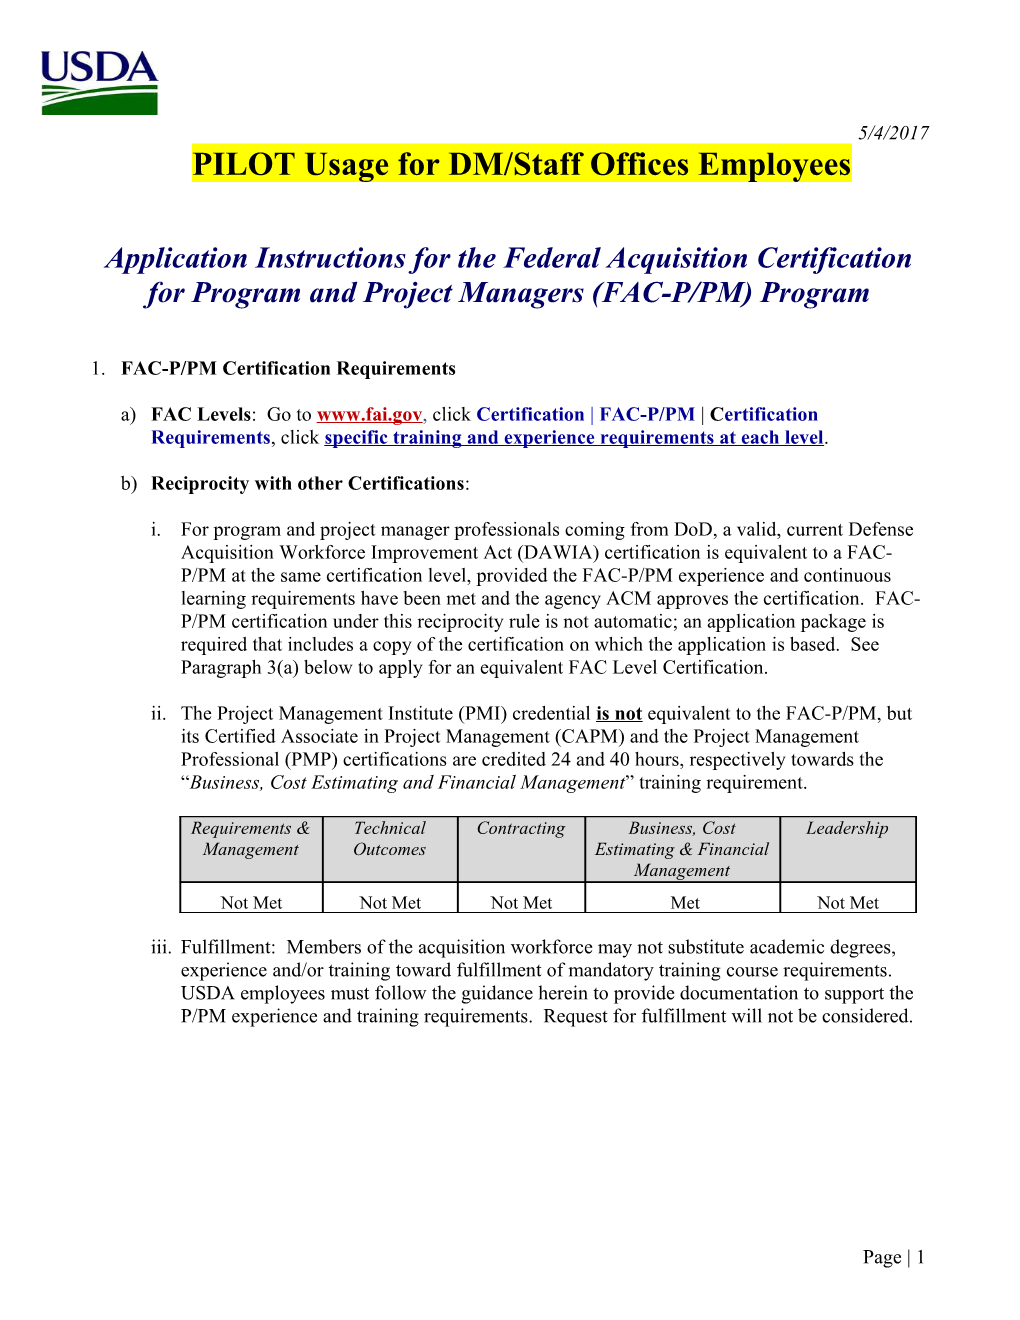 PILOT Usage for DM/Staff Offices Employees